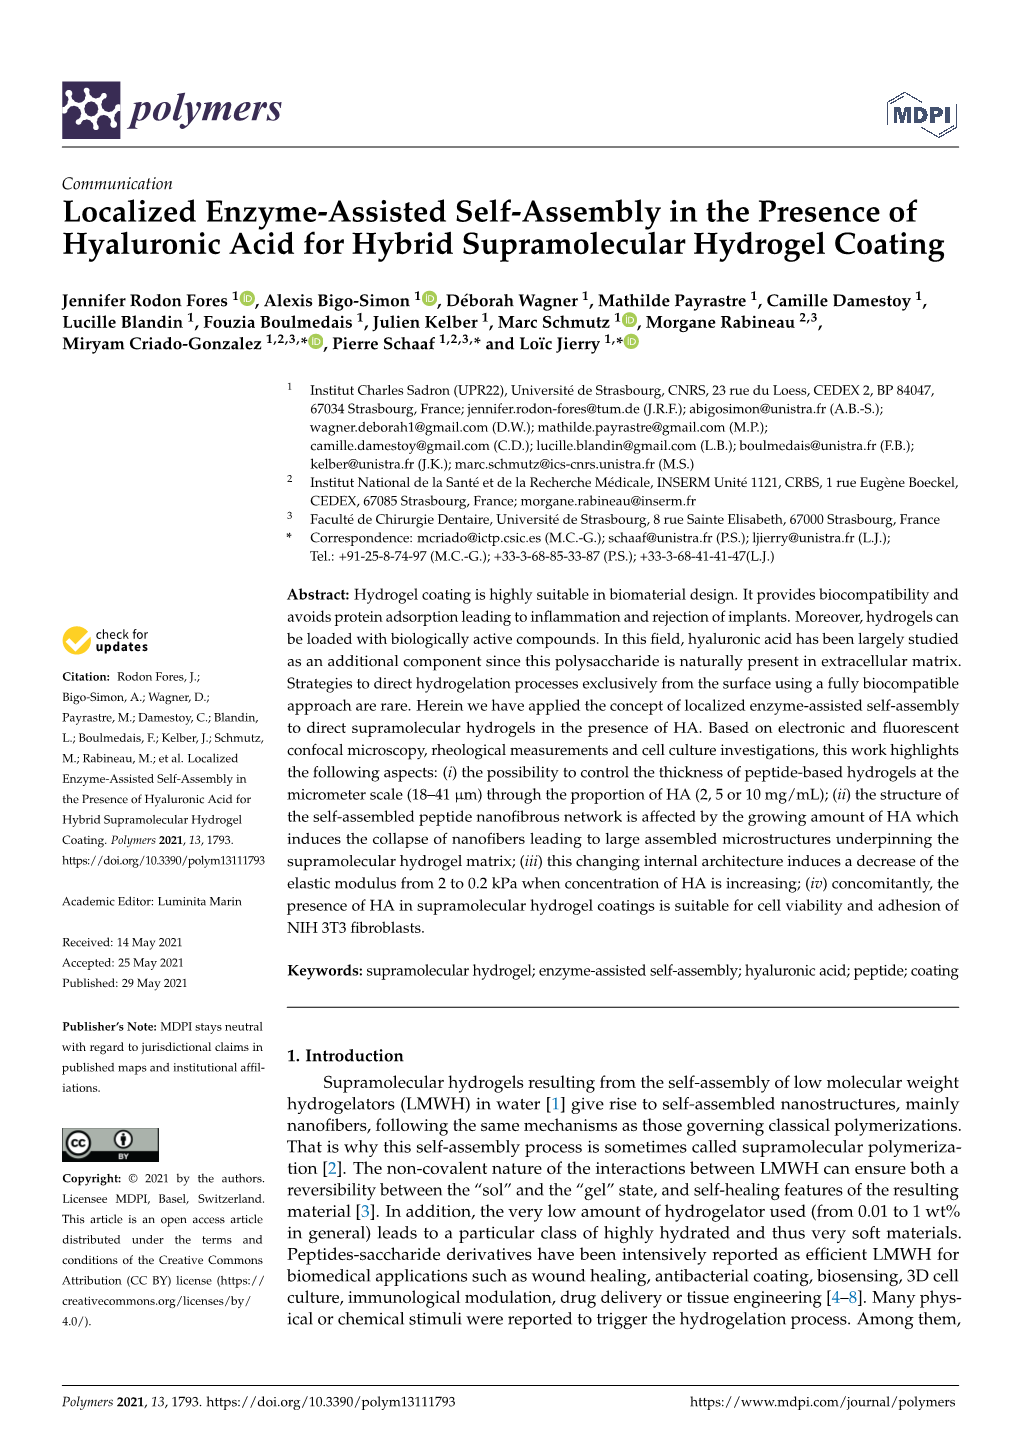 Localized Enzyme-Assisted Self-Assembly in the Presence of Hyaluronic Acid for Hybrid Supramolecular Hydrogel Coating